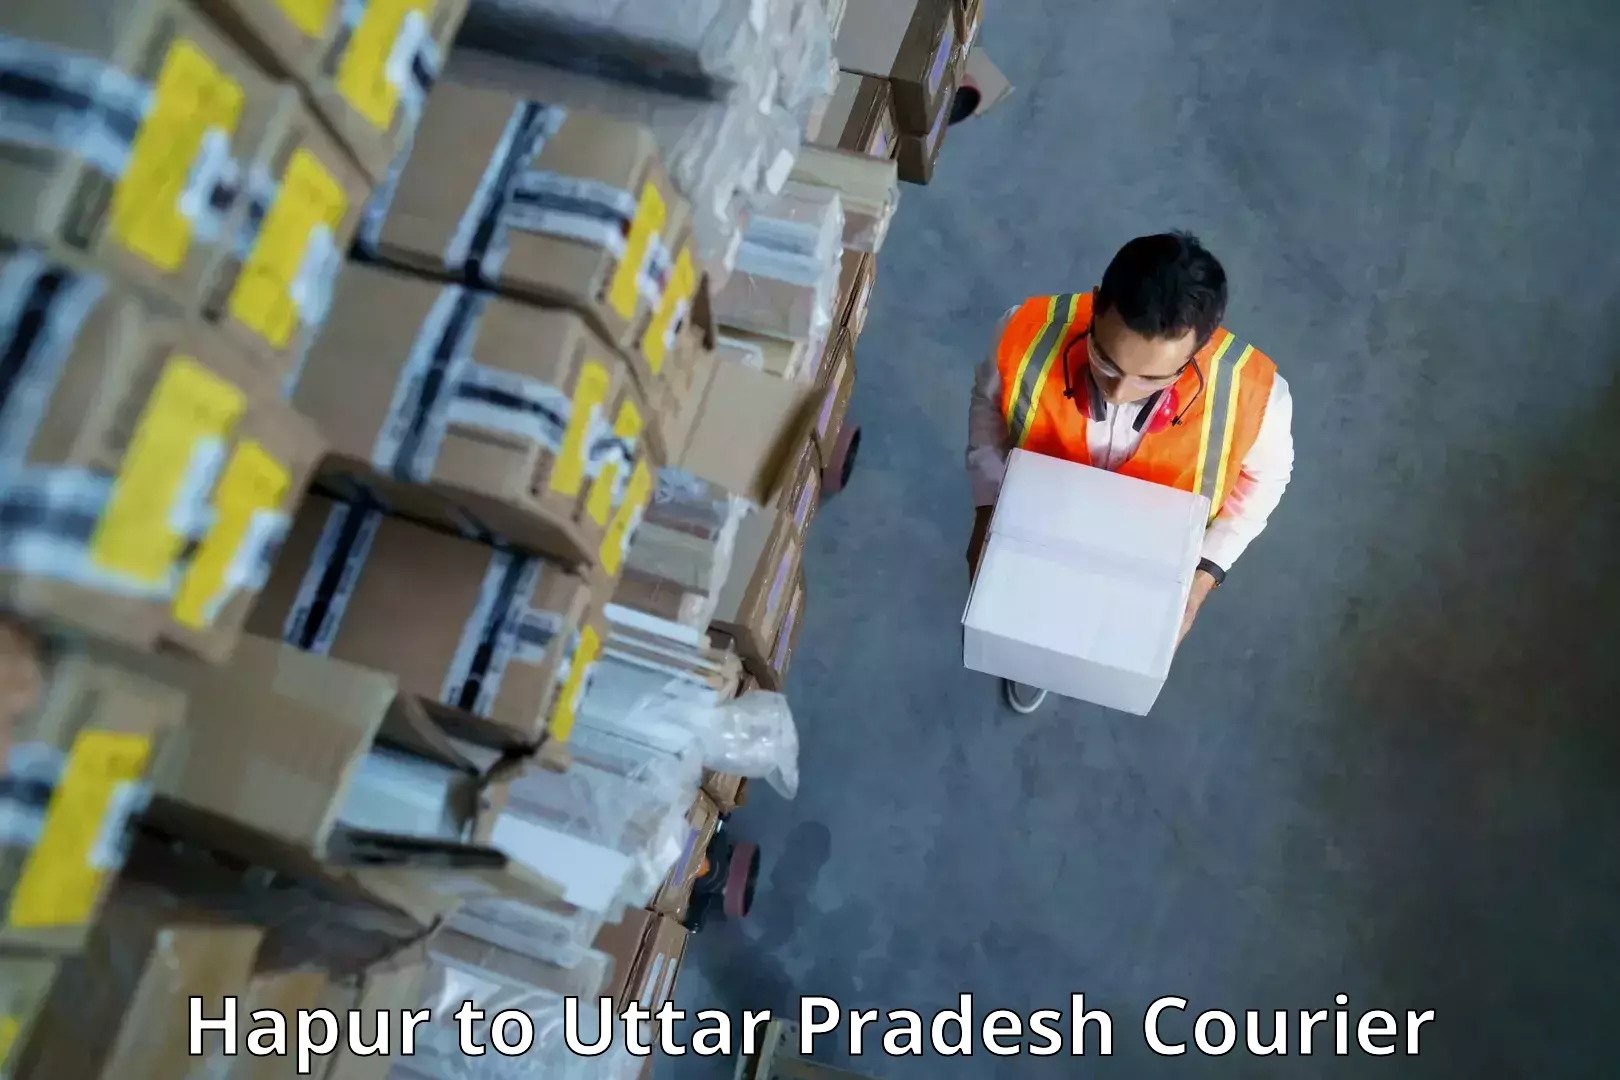 Efficient order fulfillment in Hapur to Saidabad